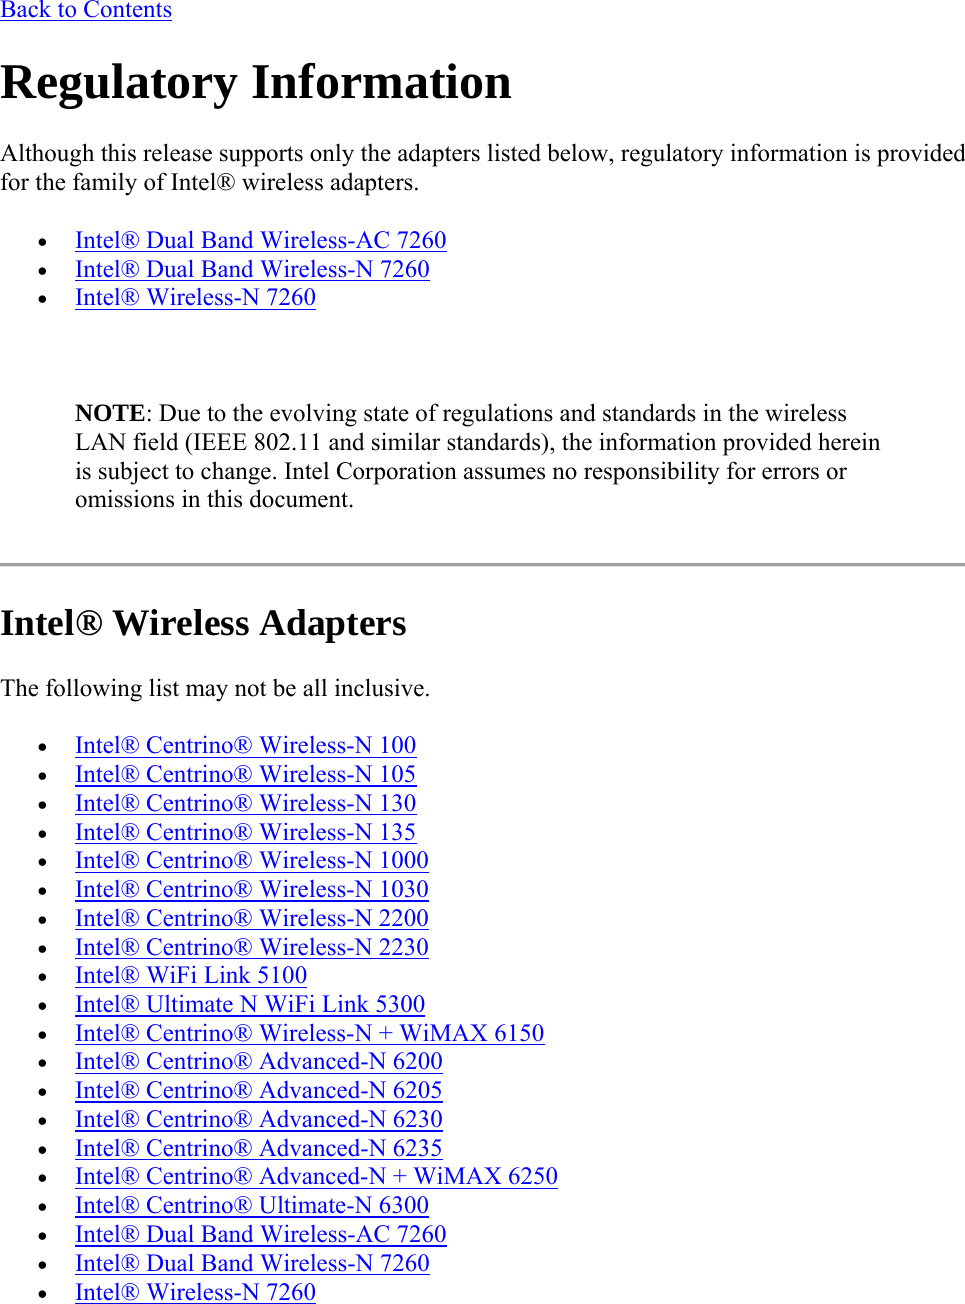 Back to Contents Regulatory Information Although this release supports only the adapters listed below, regulatory information is provided for the family of Intel® wireless adapters.  Intel® Dual Band Wireless-AC 7260  Intel® Dual Band Wireless-N 7260  Intel® Wireless-N 7260   NOTE: Due to the evolving state of regulations and standards in the wireless LAN field (IEEE 802.11 and similar standards), the information provided herein is subject to change. Intel Corporation assumes no responsibility for errors or omissions in this document.  Intel® Wireless Adapters The following list may not be all inclusive.  Intel® Centrino® Wireless-N 100  Intel® Centrino® Wireless-N 105  Intel® Centrino® Wireless-N 130  Intel® Centrino® Wireless-N 135  Intel® Centrino® Wireless-N 1000  Intel® Centrino® Wireless-N 1030   Intel® Centrino® Wireless-N 2200  Intel® Centrino® Wireless-N 2230  Intel® WiFi Link 5100  Intel® Ultimate N WiFi Link 5300  Intel® Centrino® Wireless-N + WiMAX 6150  Intel® Centrino® Advanced-N 6200  Intel® Centrino® Advanced-N 6205  Intel® Centrino® Advanced-N 6230  Intel® Centrino® Advanced-N 6235  Intel® Centrino® Advanced-N + WiMAX 6250  Intel® Centrino® Ultimate-N 6300  Intel® Dual Band Wireless-AC 7260  Intel® Dual Band Wireless-N 7260  Intel® Wireless-N 7260 